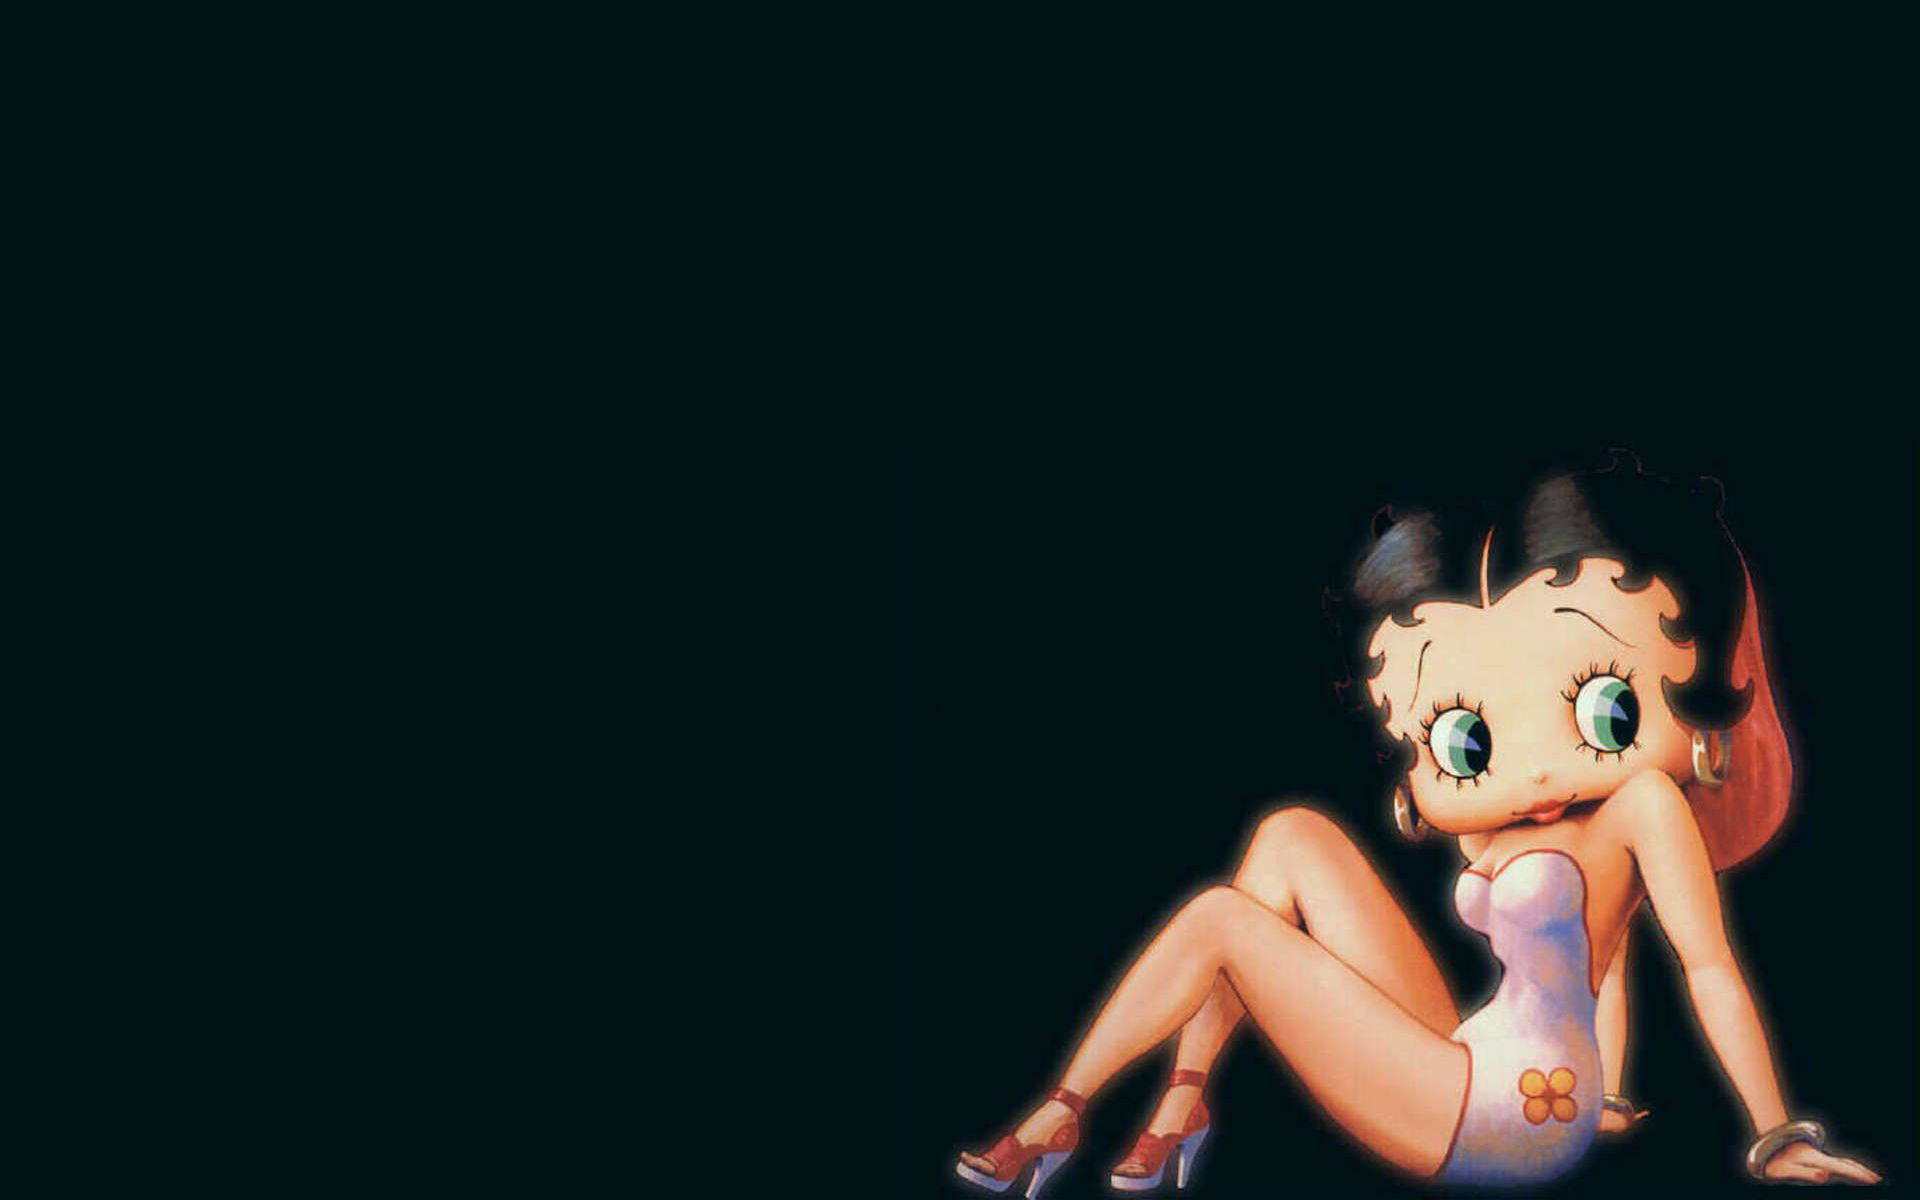 betty boop black and white wallpaper